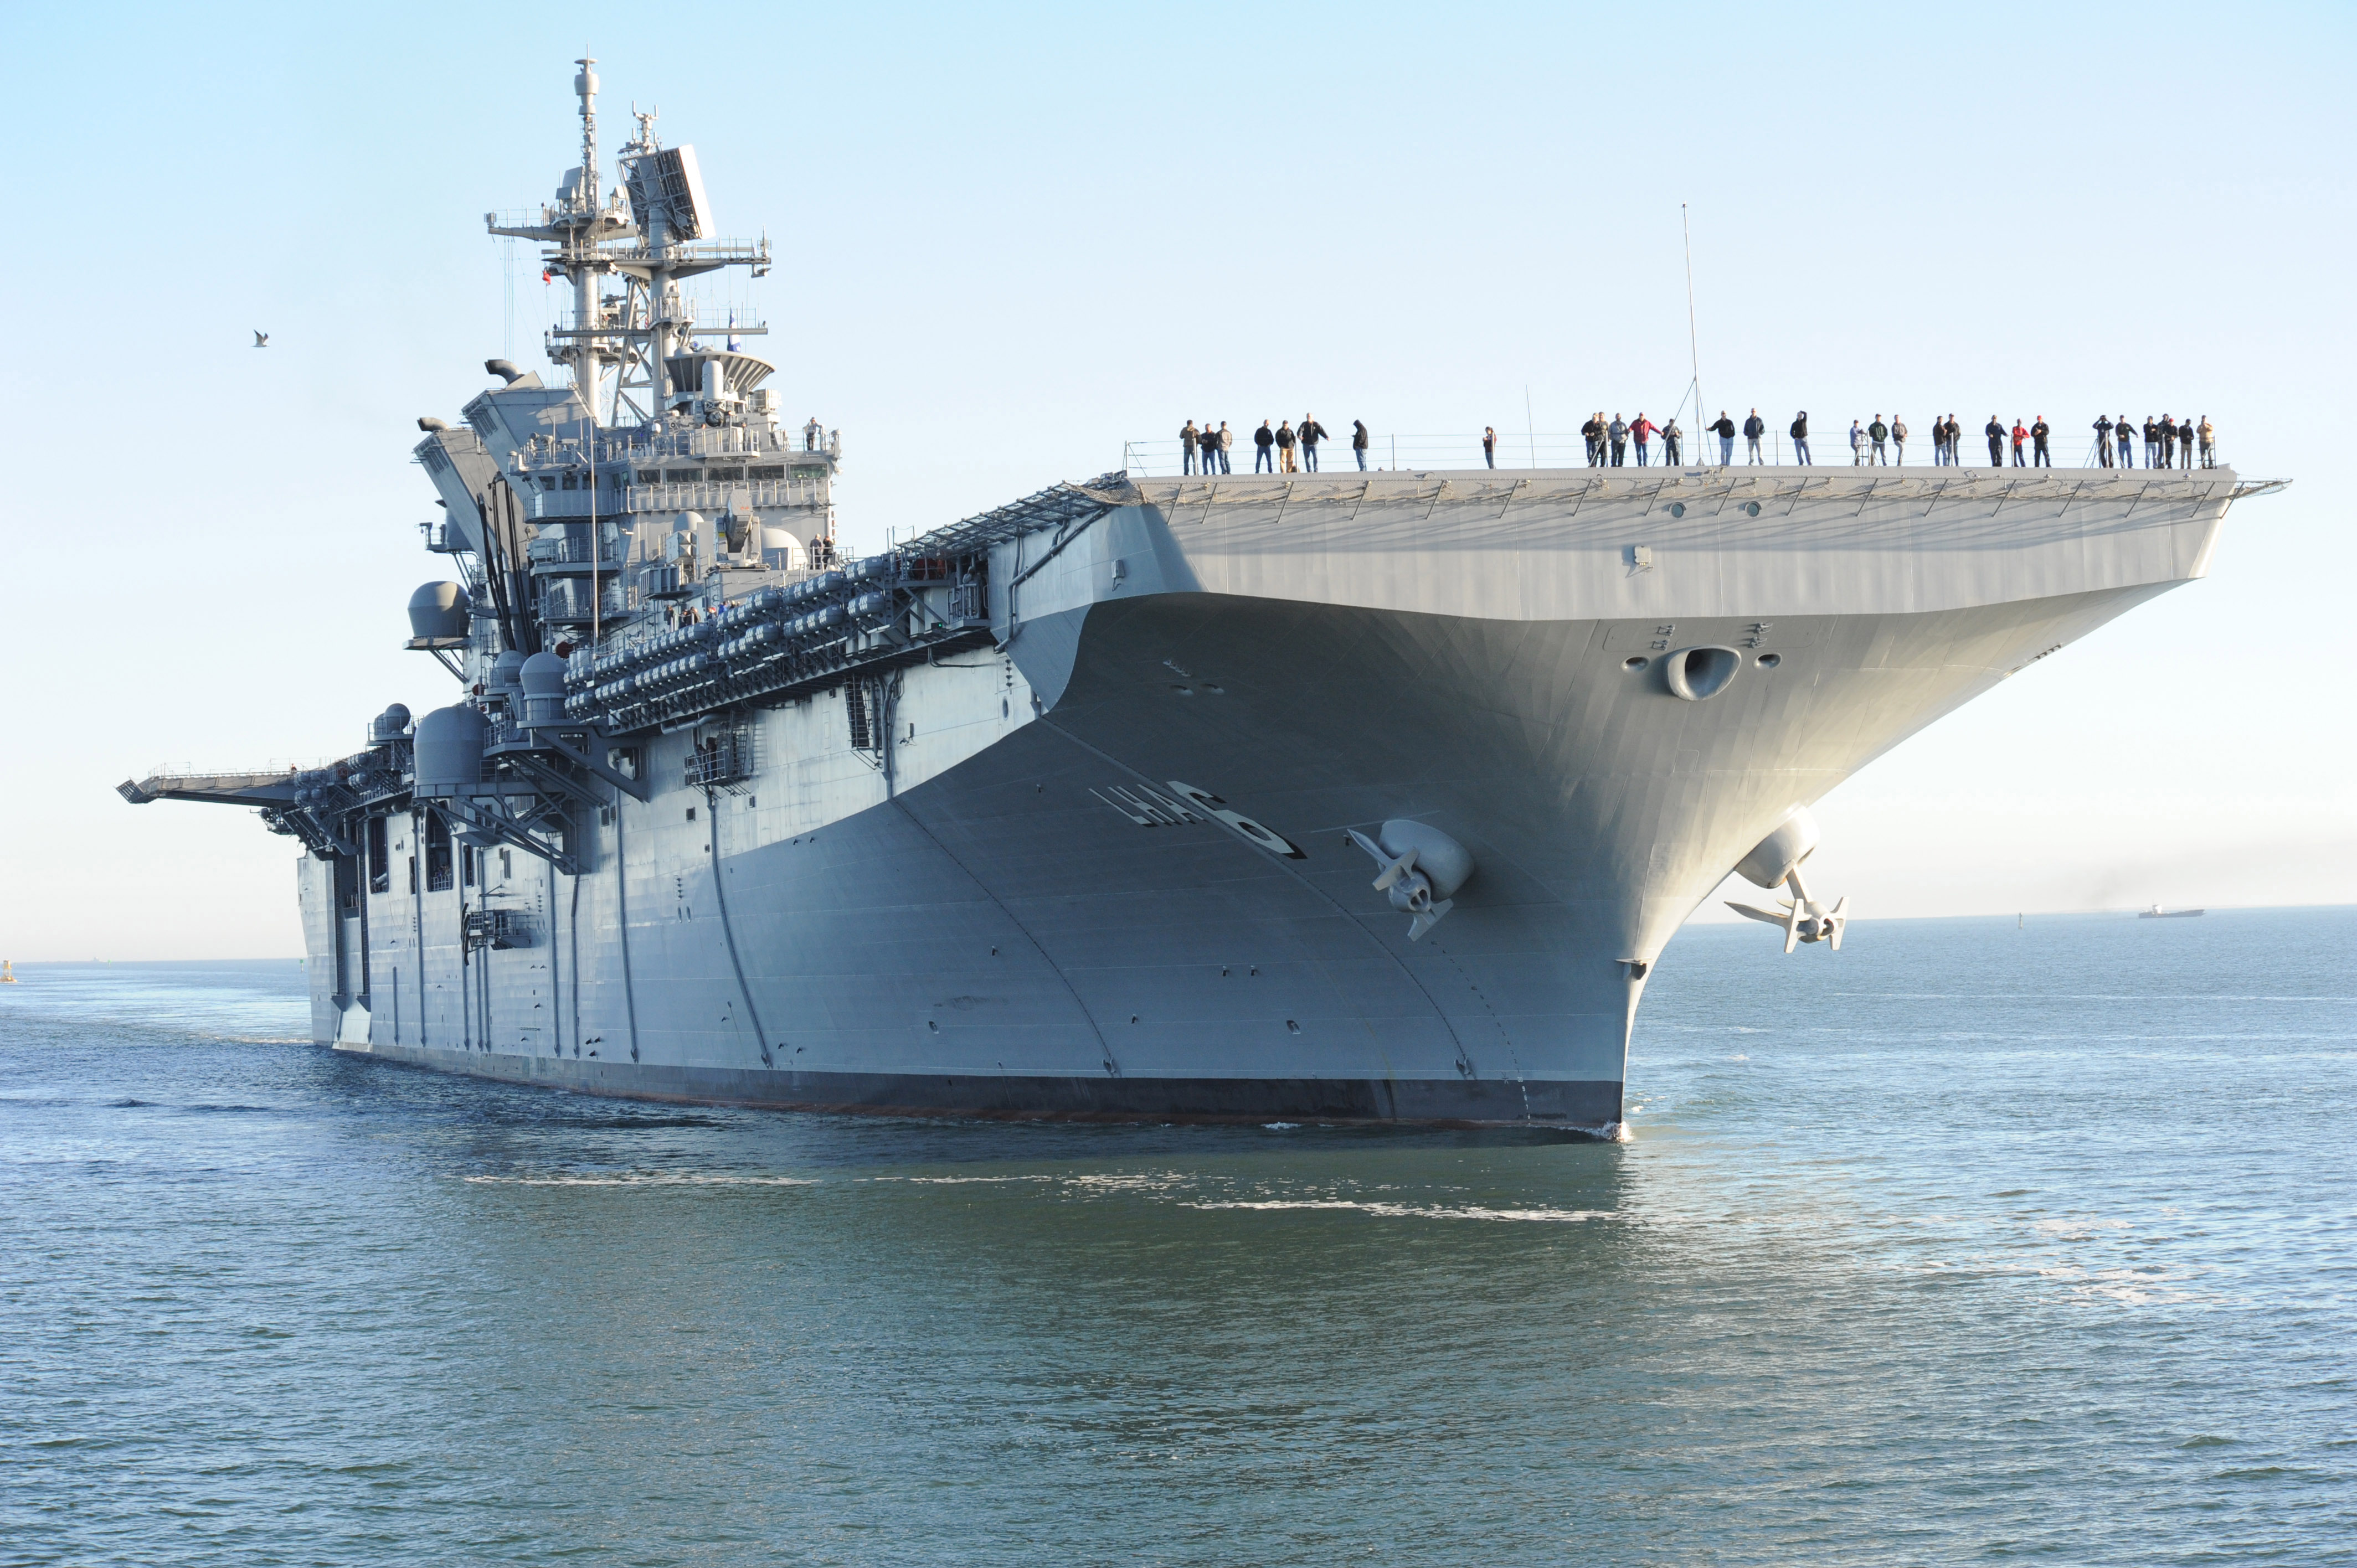 America (LHA-6) returns to Ingalls Shipyard Jan. 31, 2014 from acceptance trials. US Navy Photo